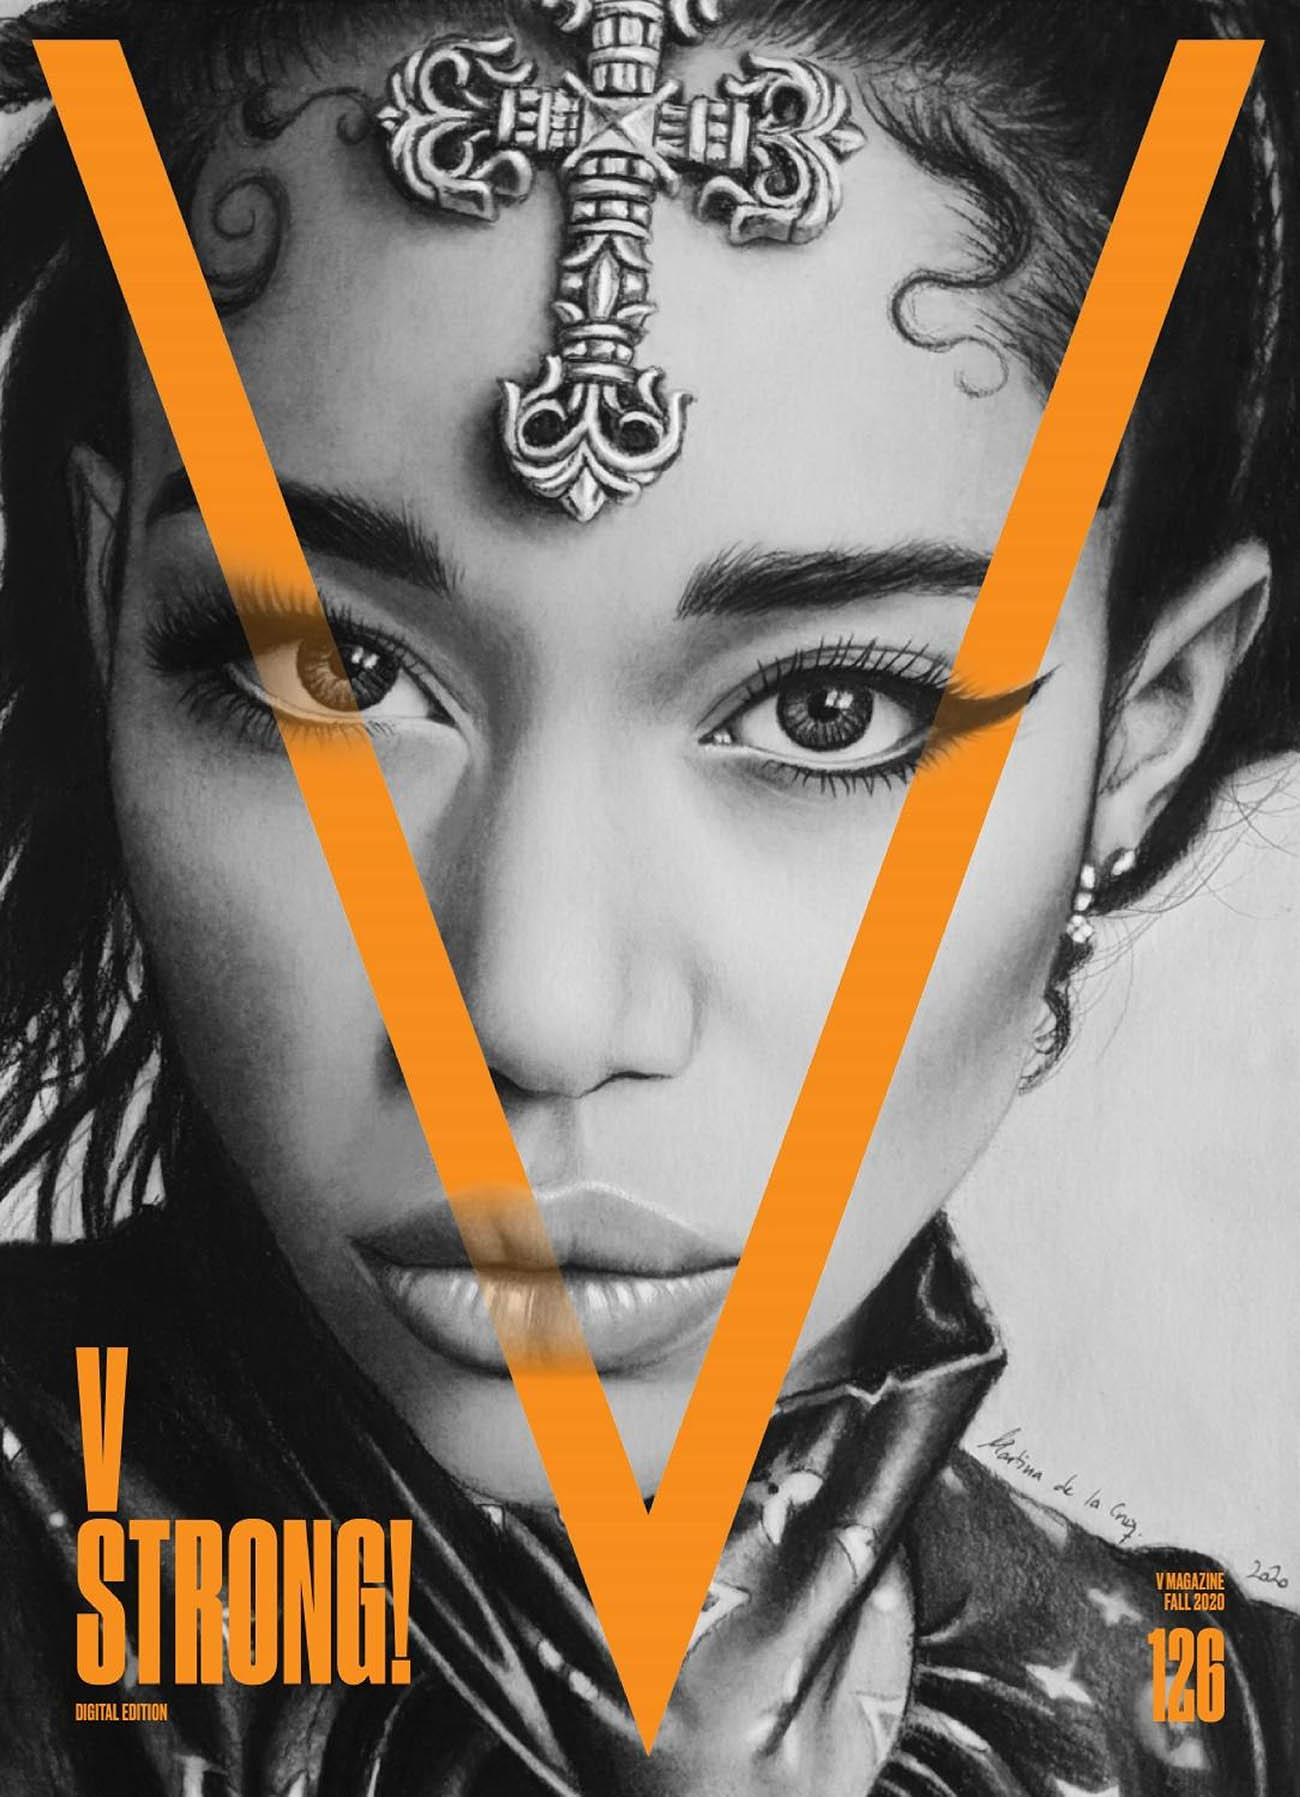 Laura Harrier covers V Magazine Fall 2020 by Inez and Vinoodh